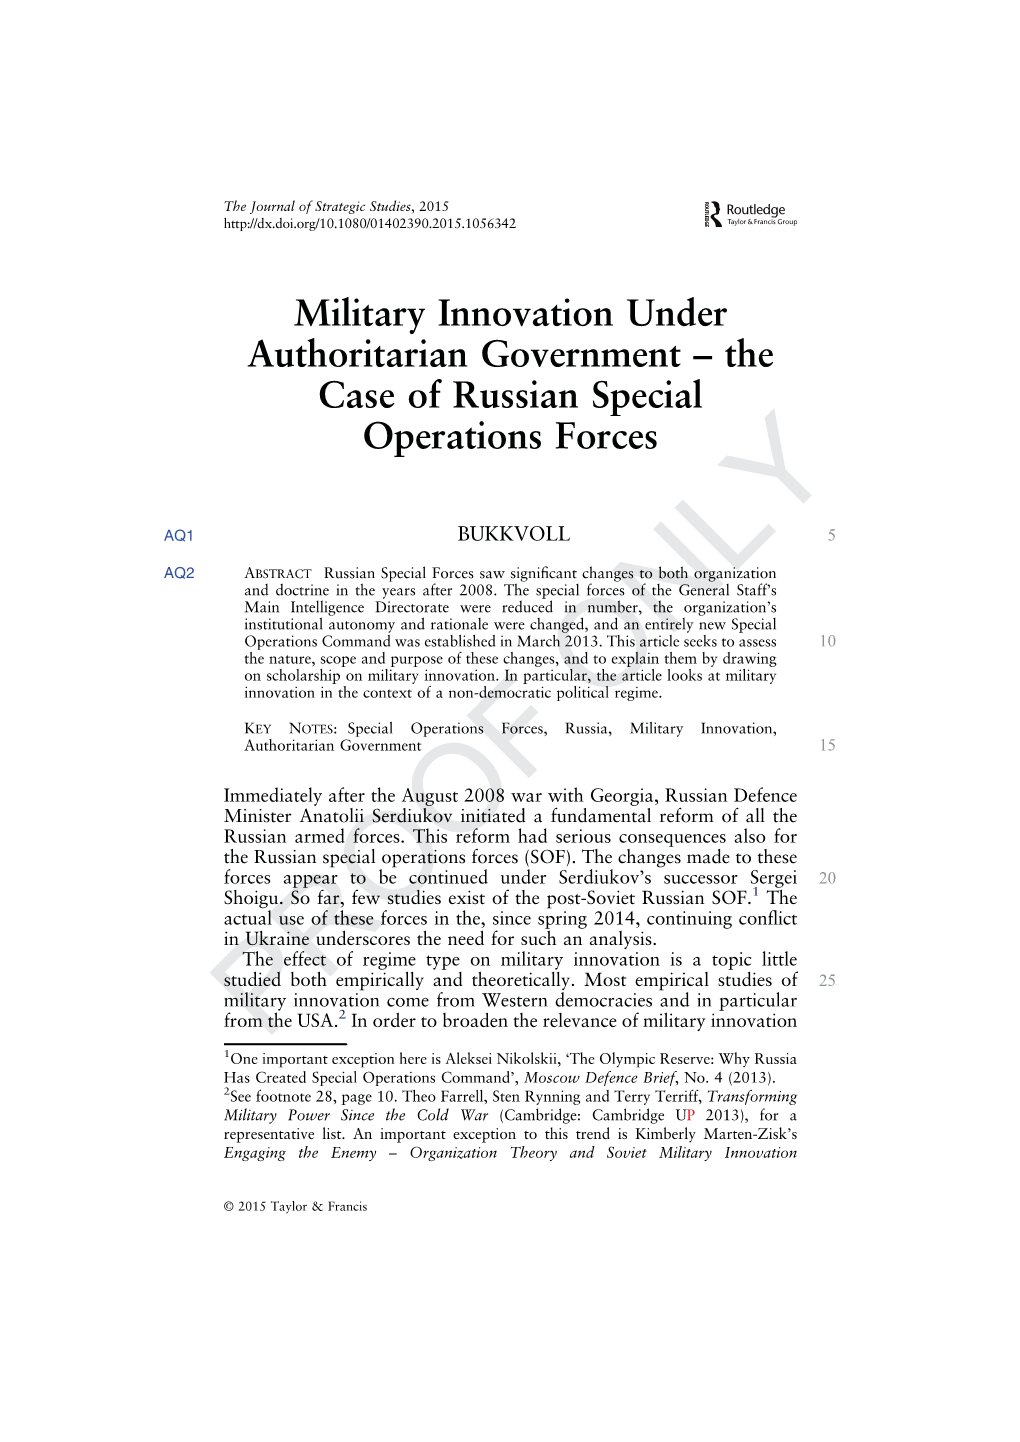 The Case of Russian Special Operations Forces